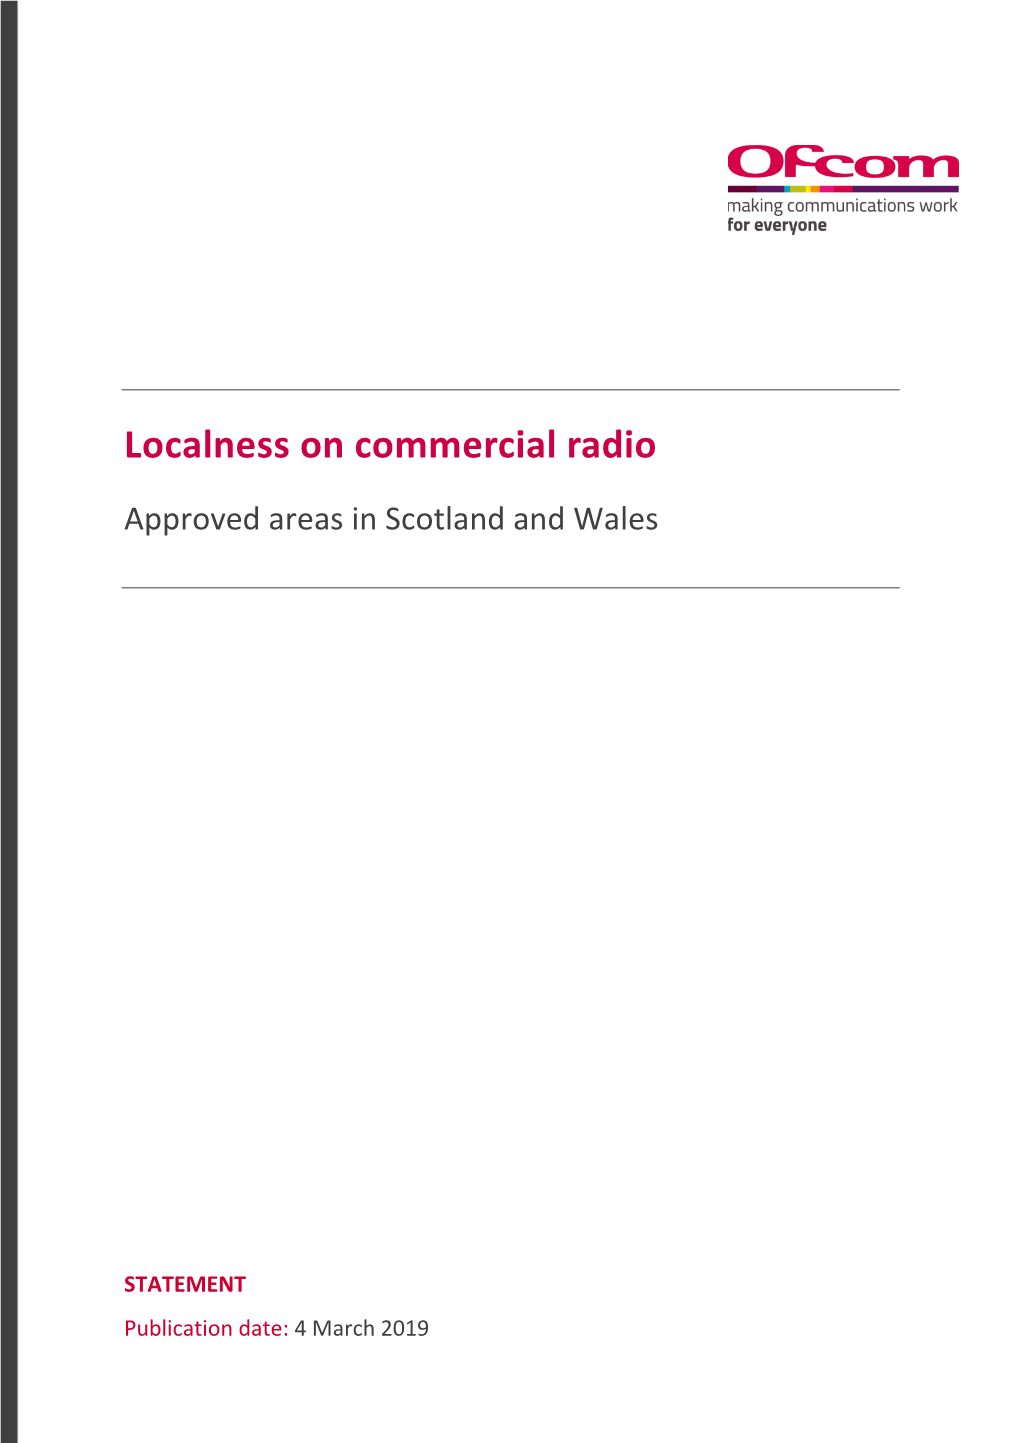 Localness on Commercial Radio Scotland & Wales Approved Areas